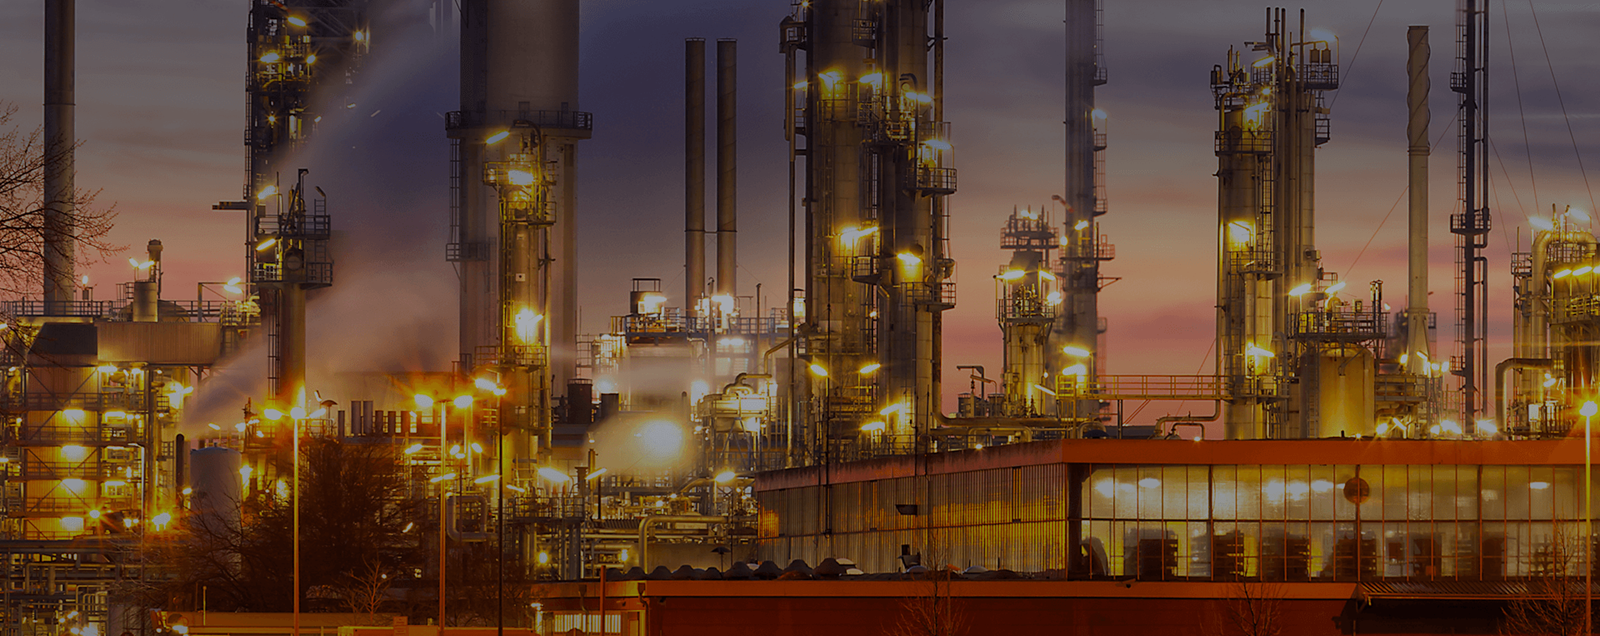 Refinery at night 